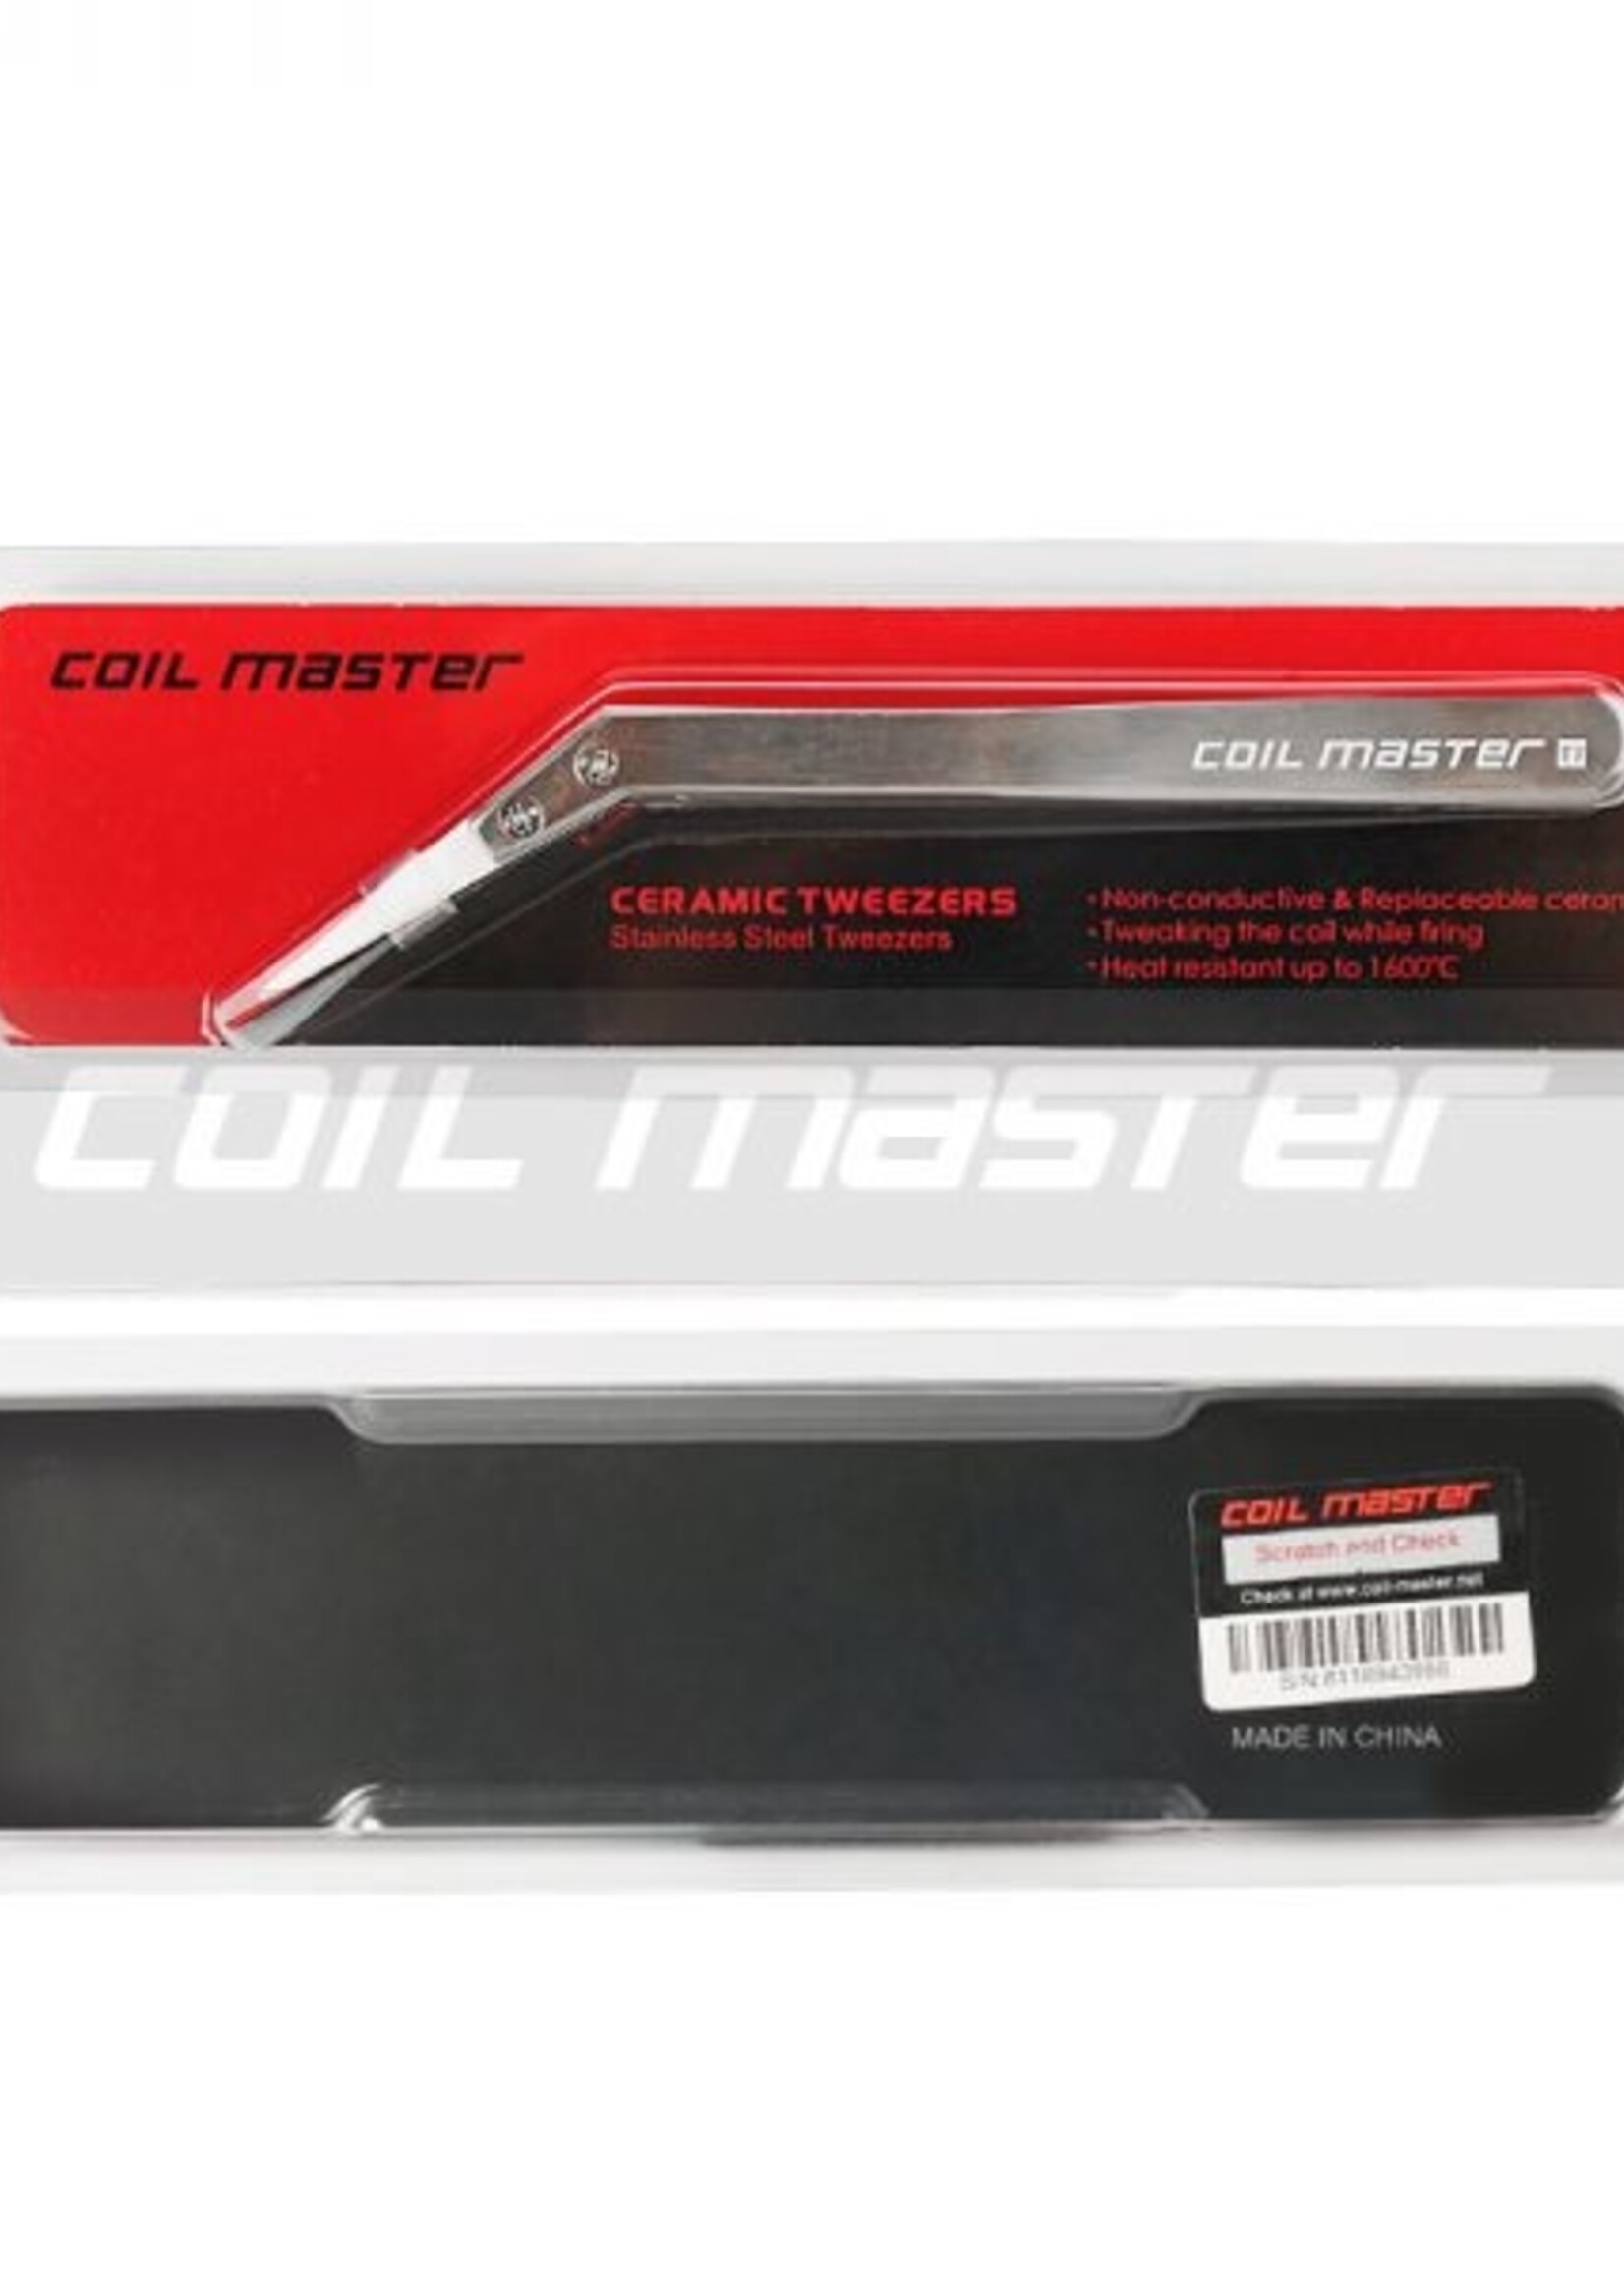 COIL MASTER COIL MASTER TOOLS